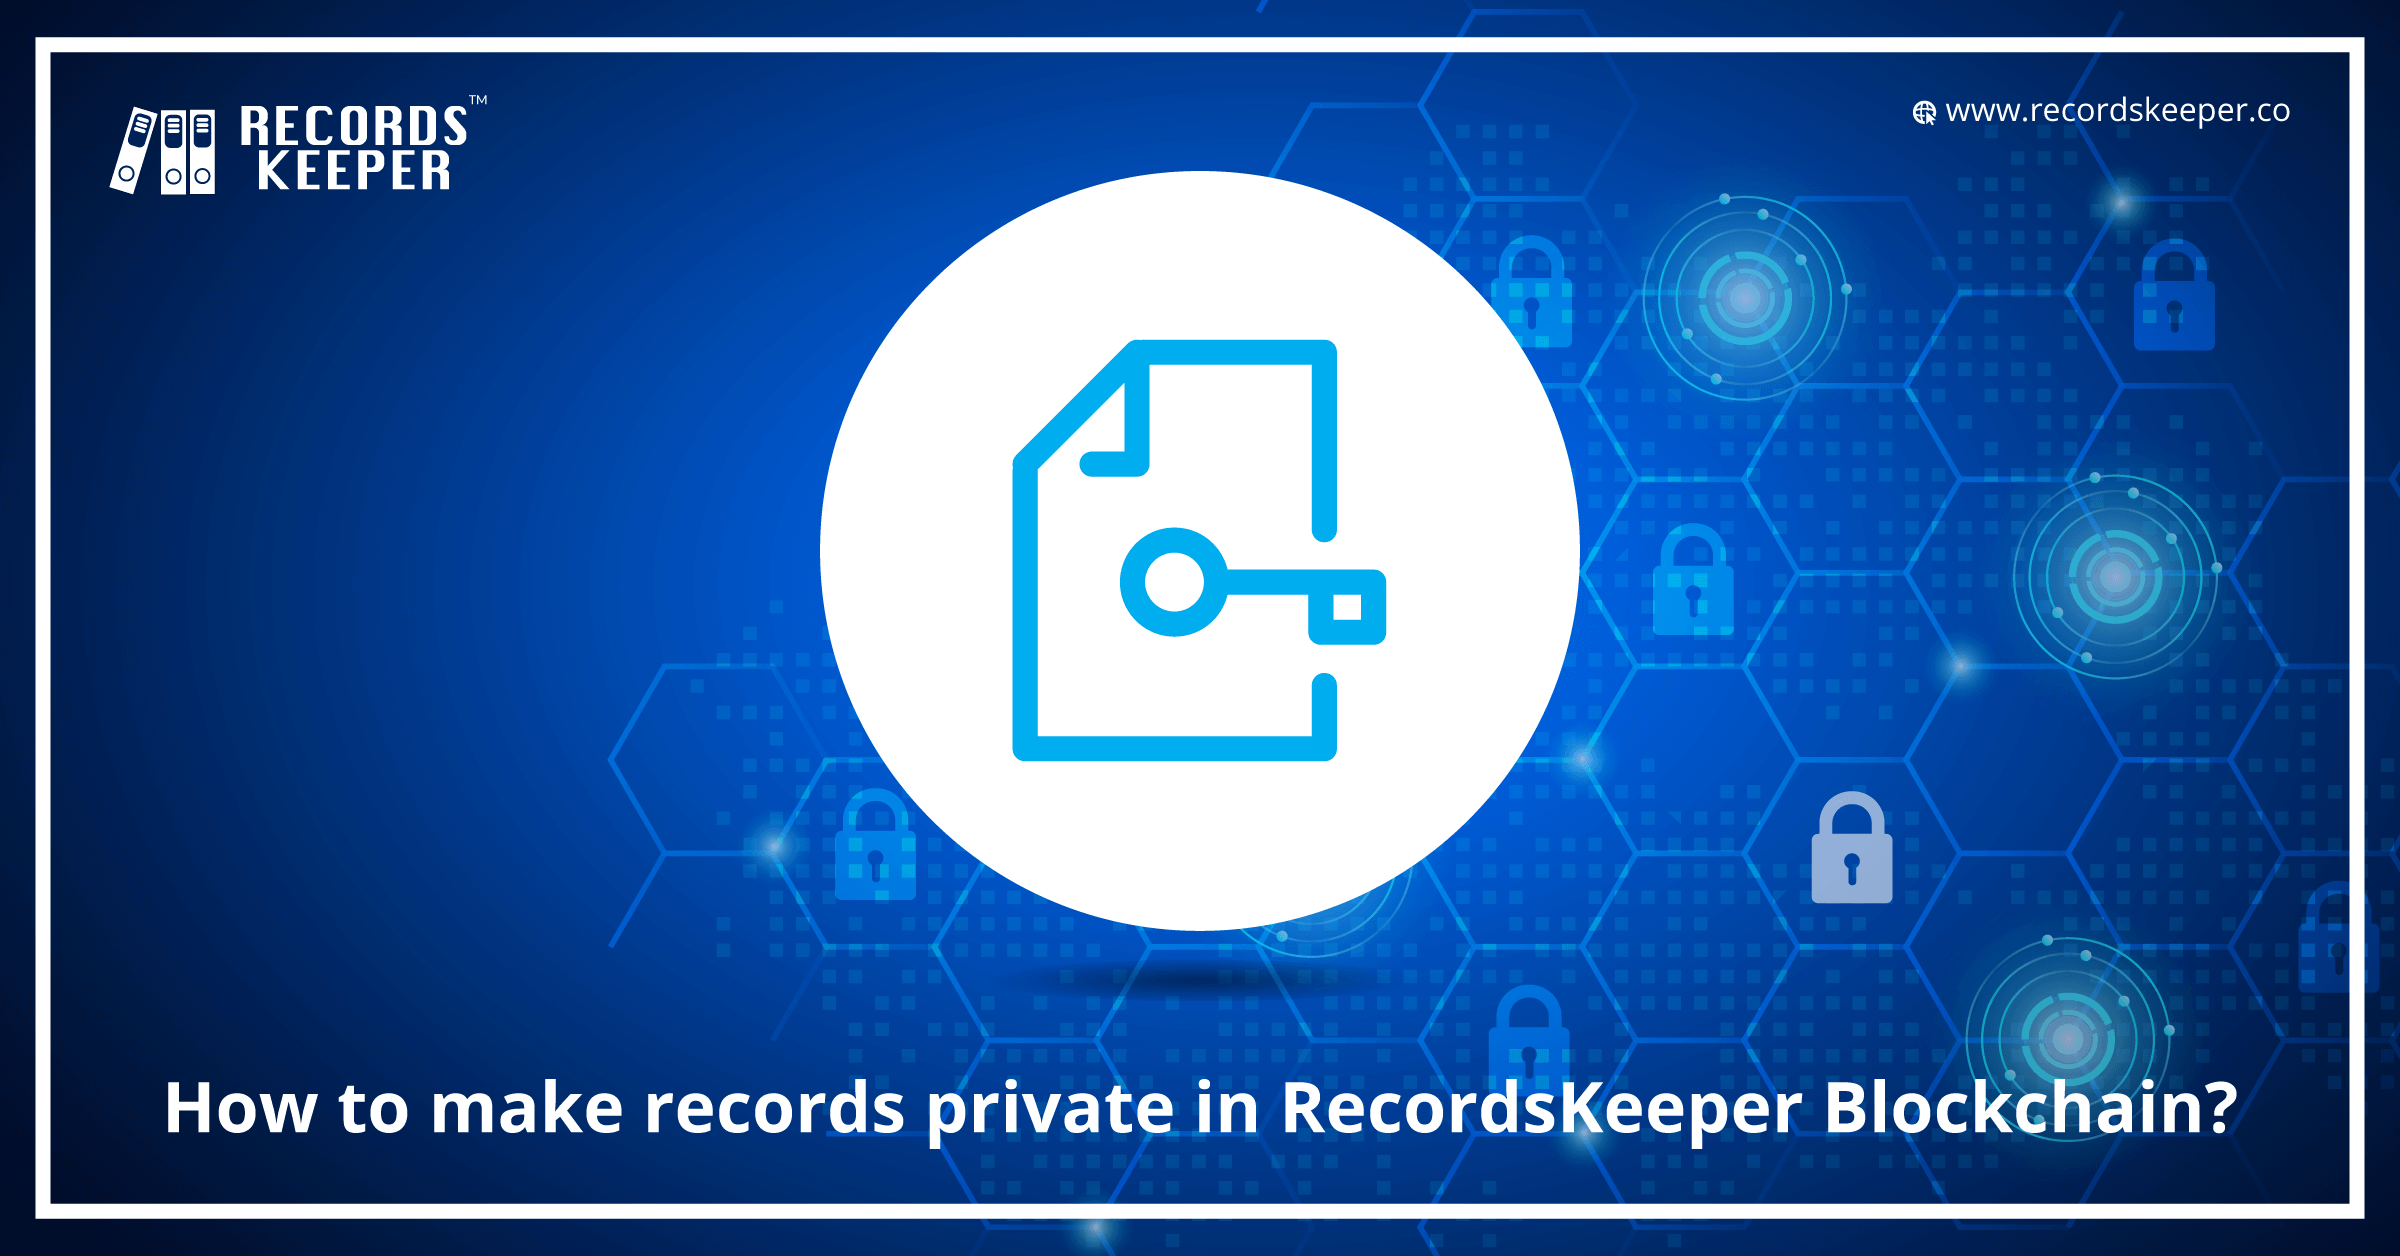 How to make Records private in RecordsKeeper Blockchain?